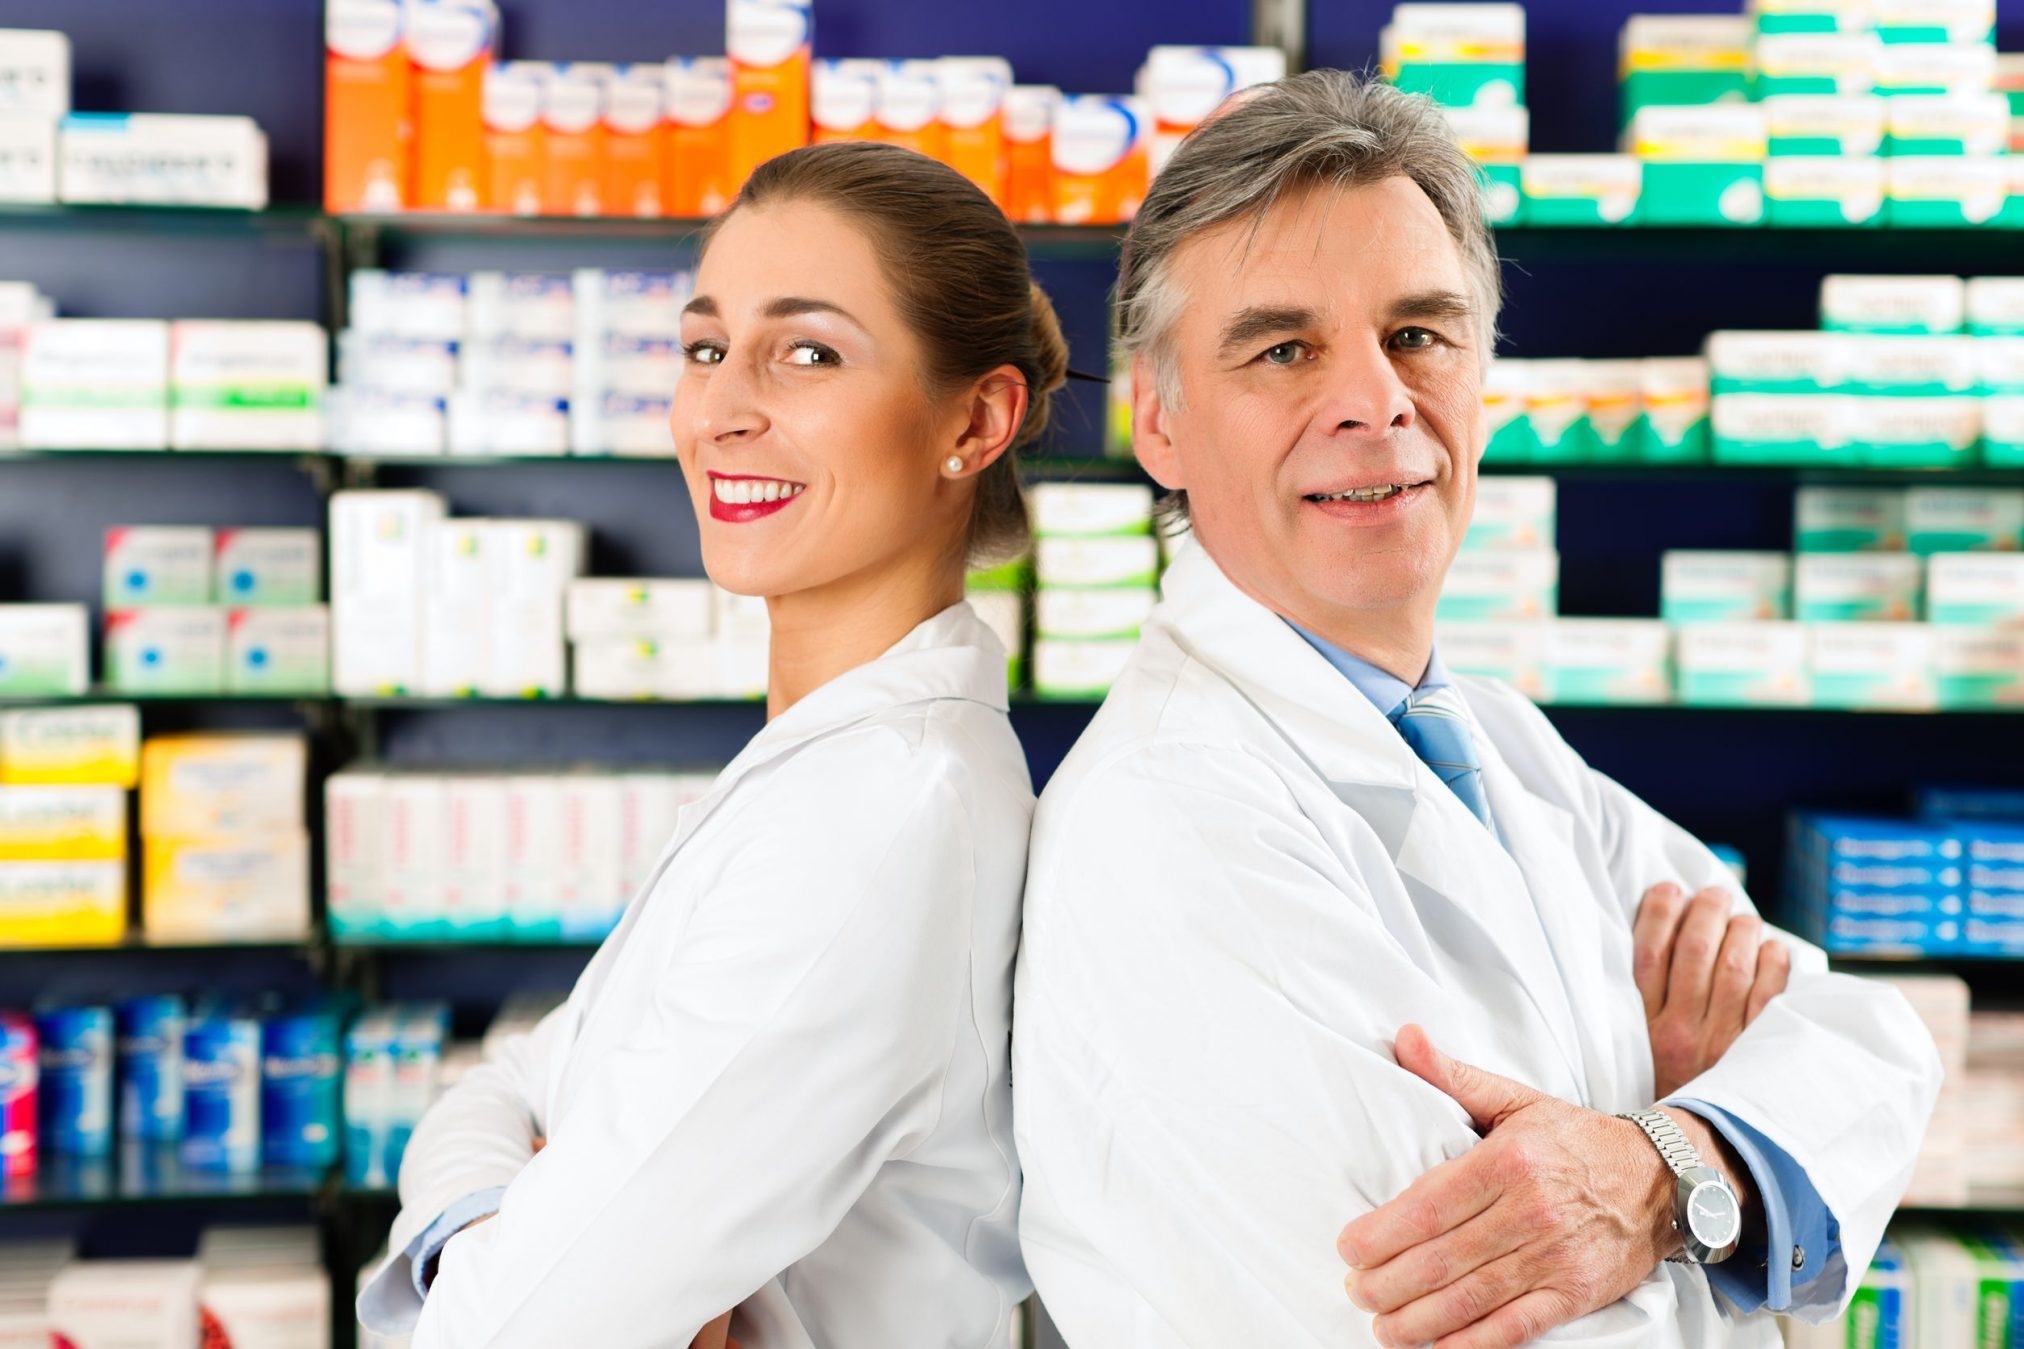 0016562 - two pharmacists standing in pharmacy or drugstore in front of shelves with pharmaceuticals